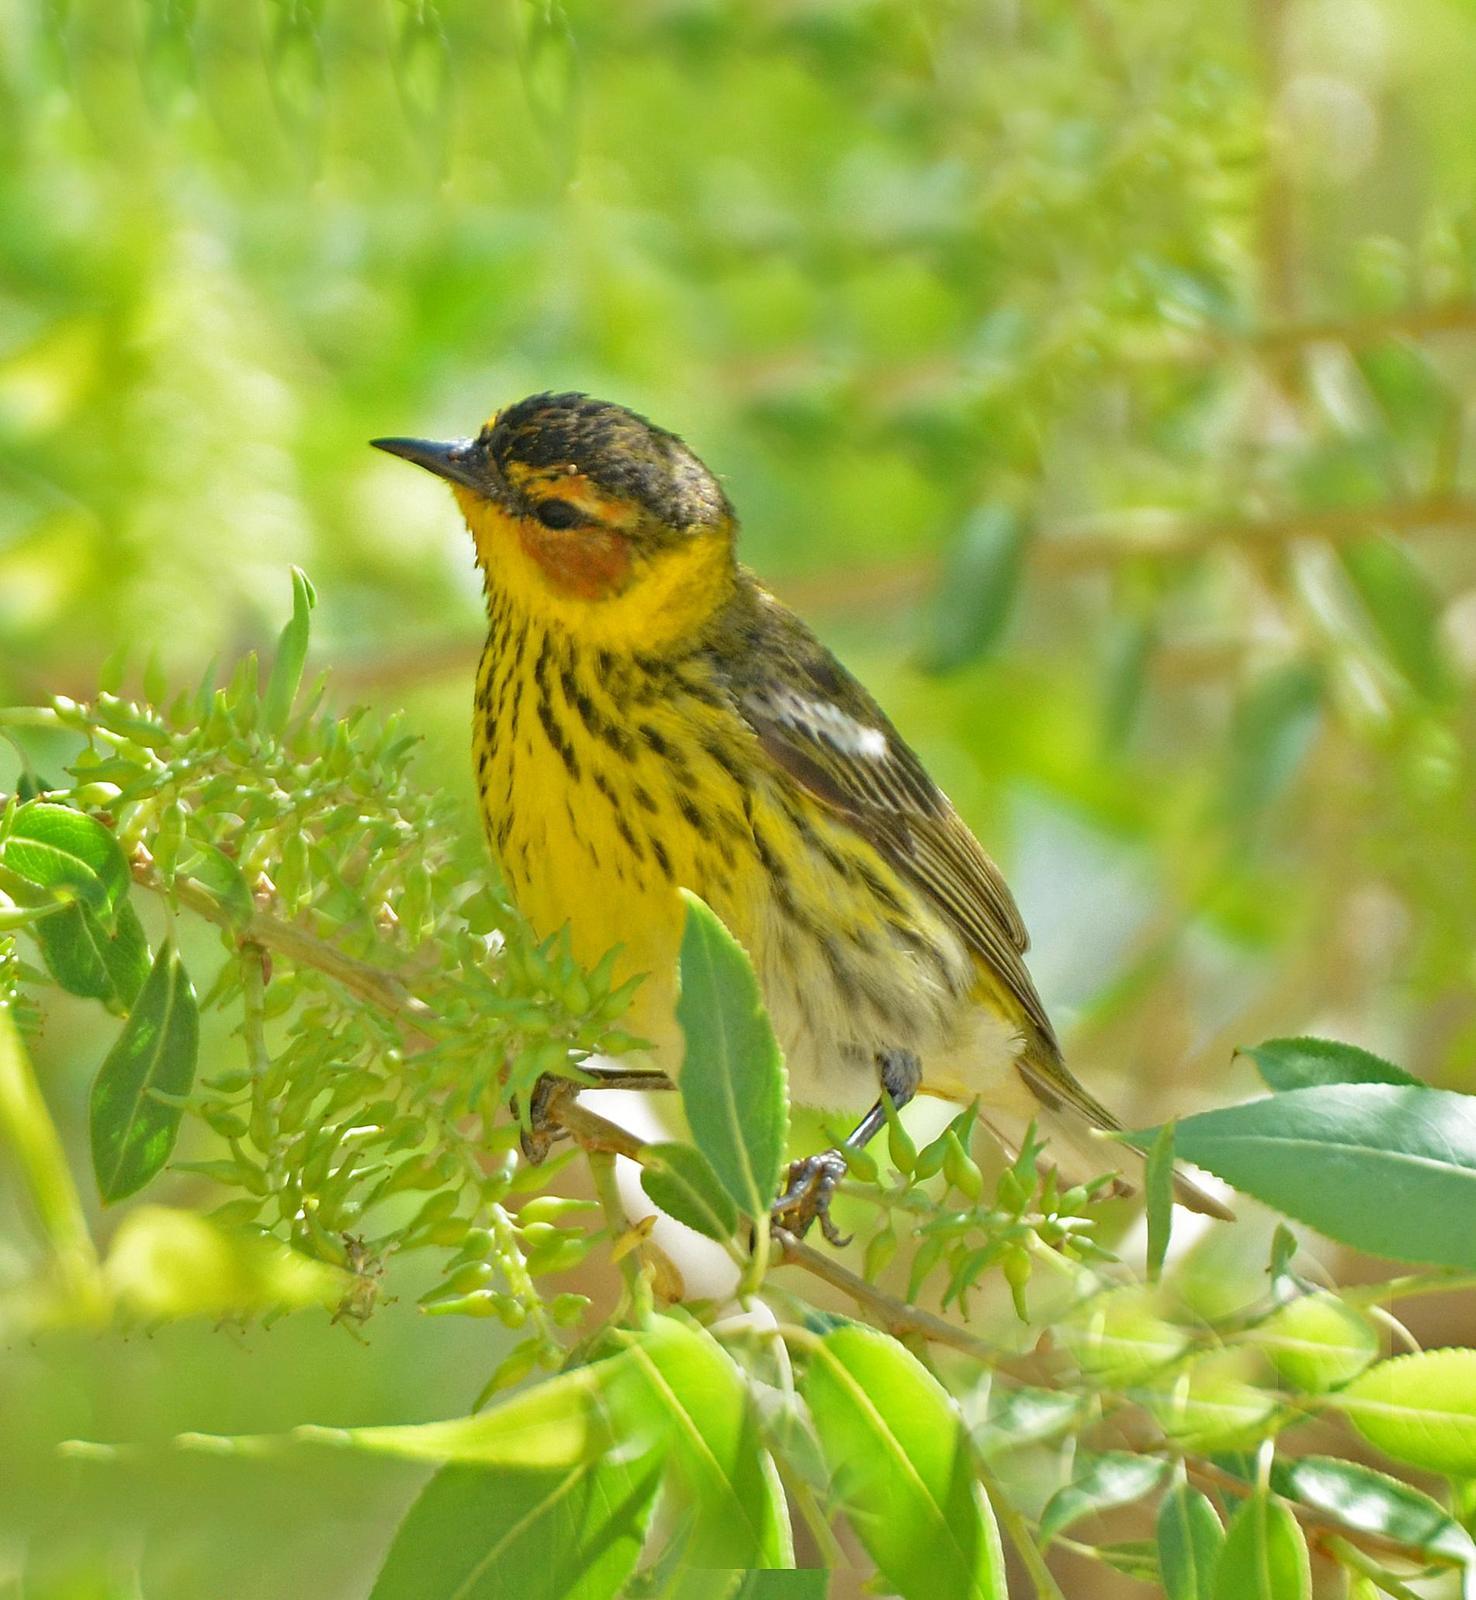 Cape May Warbler Photo by Steven Mlodinow